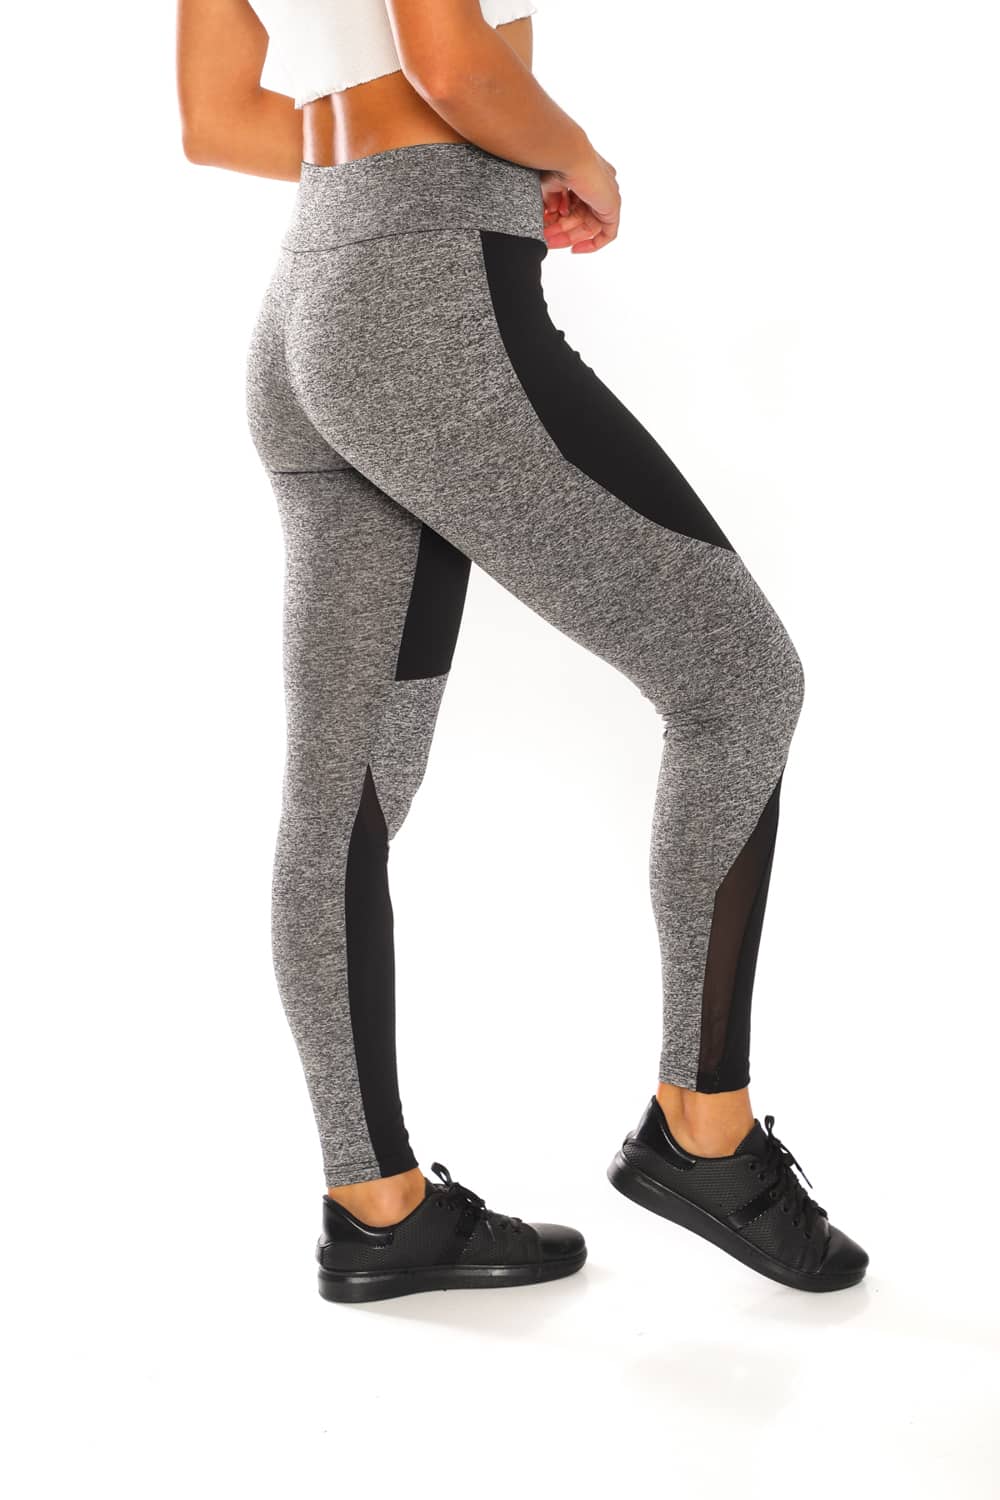 Activewear High Waisted Black and Grey Color Yoga Pants with Mesh Details Under Knees